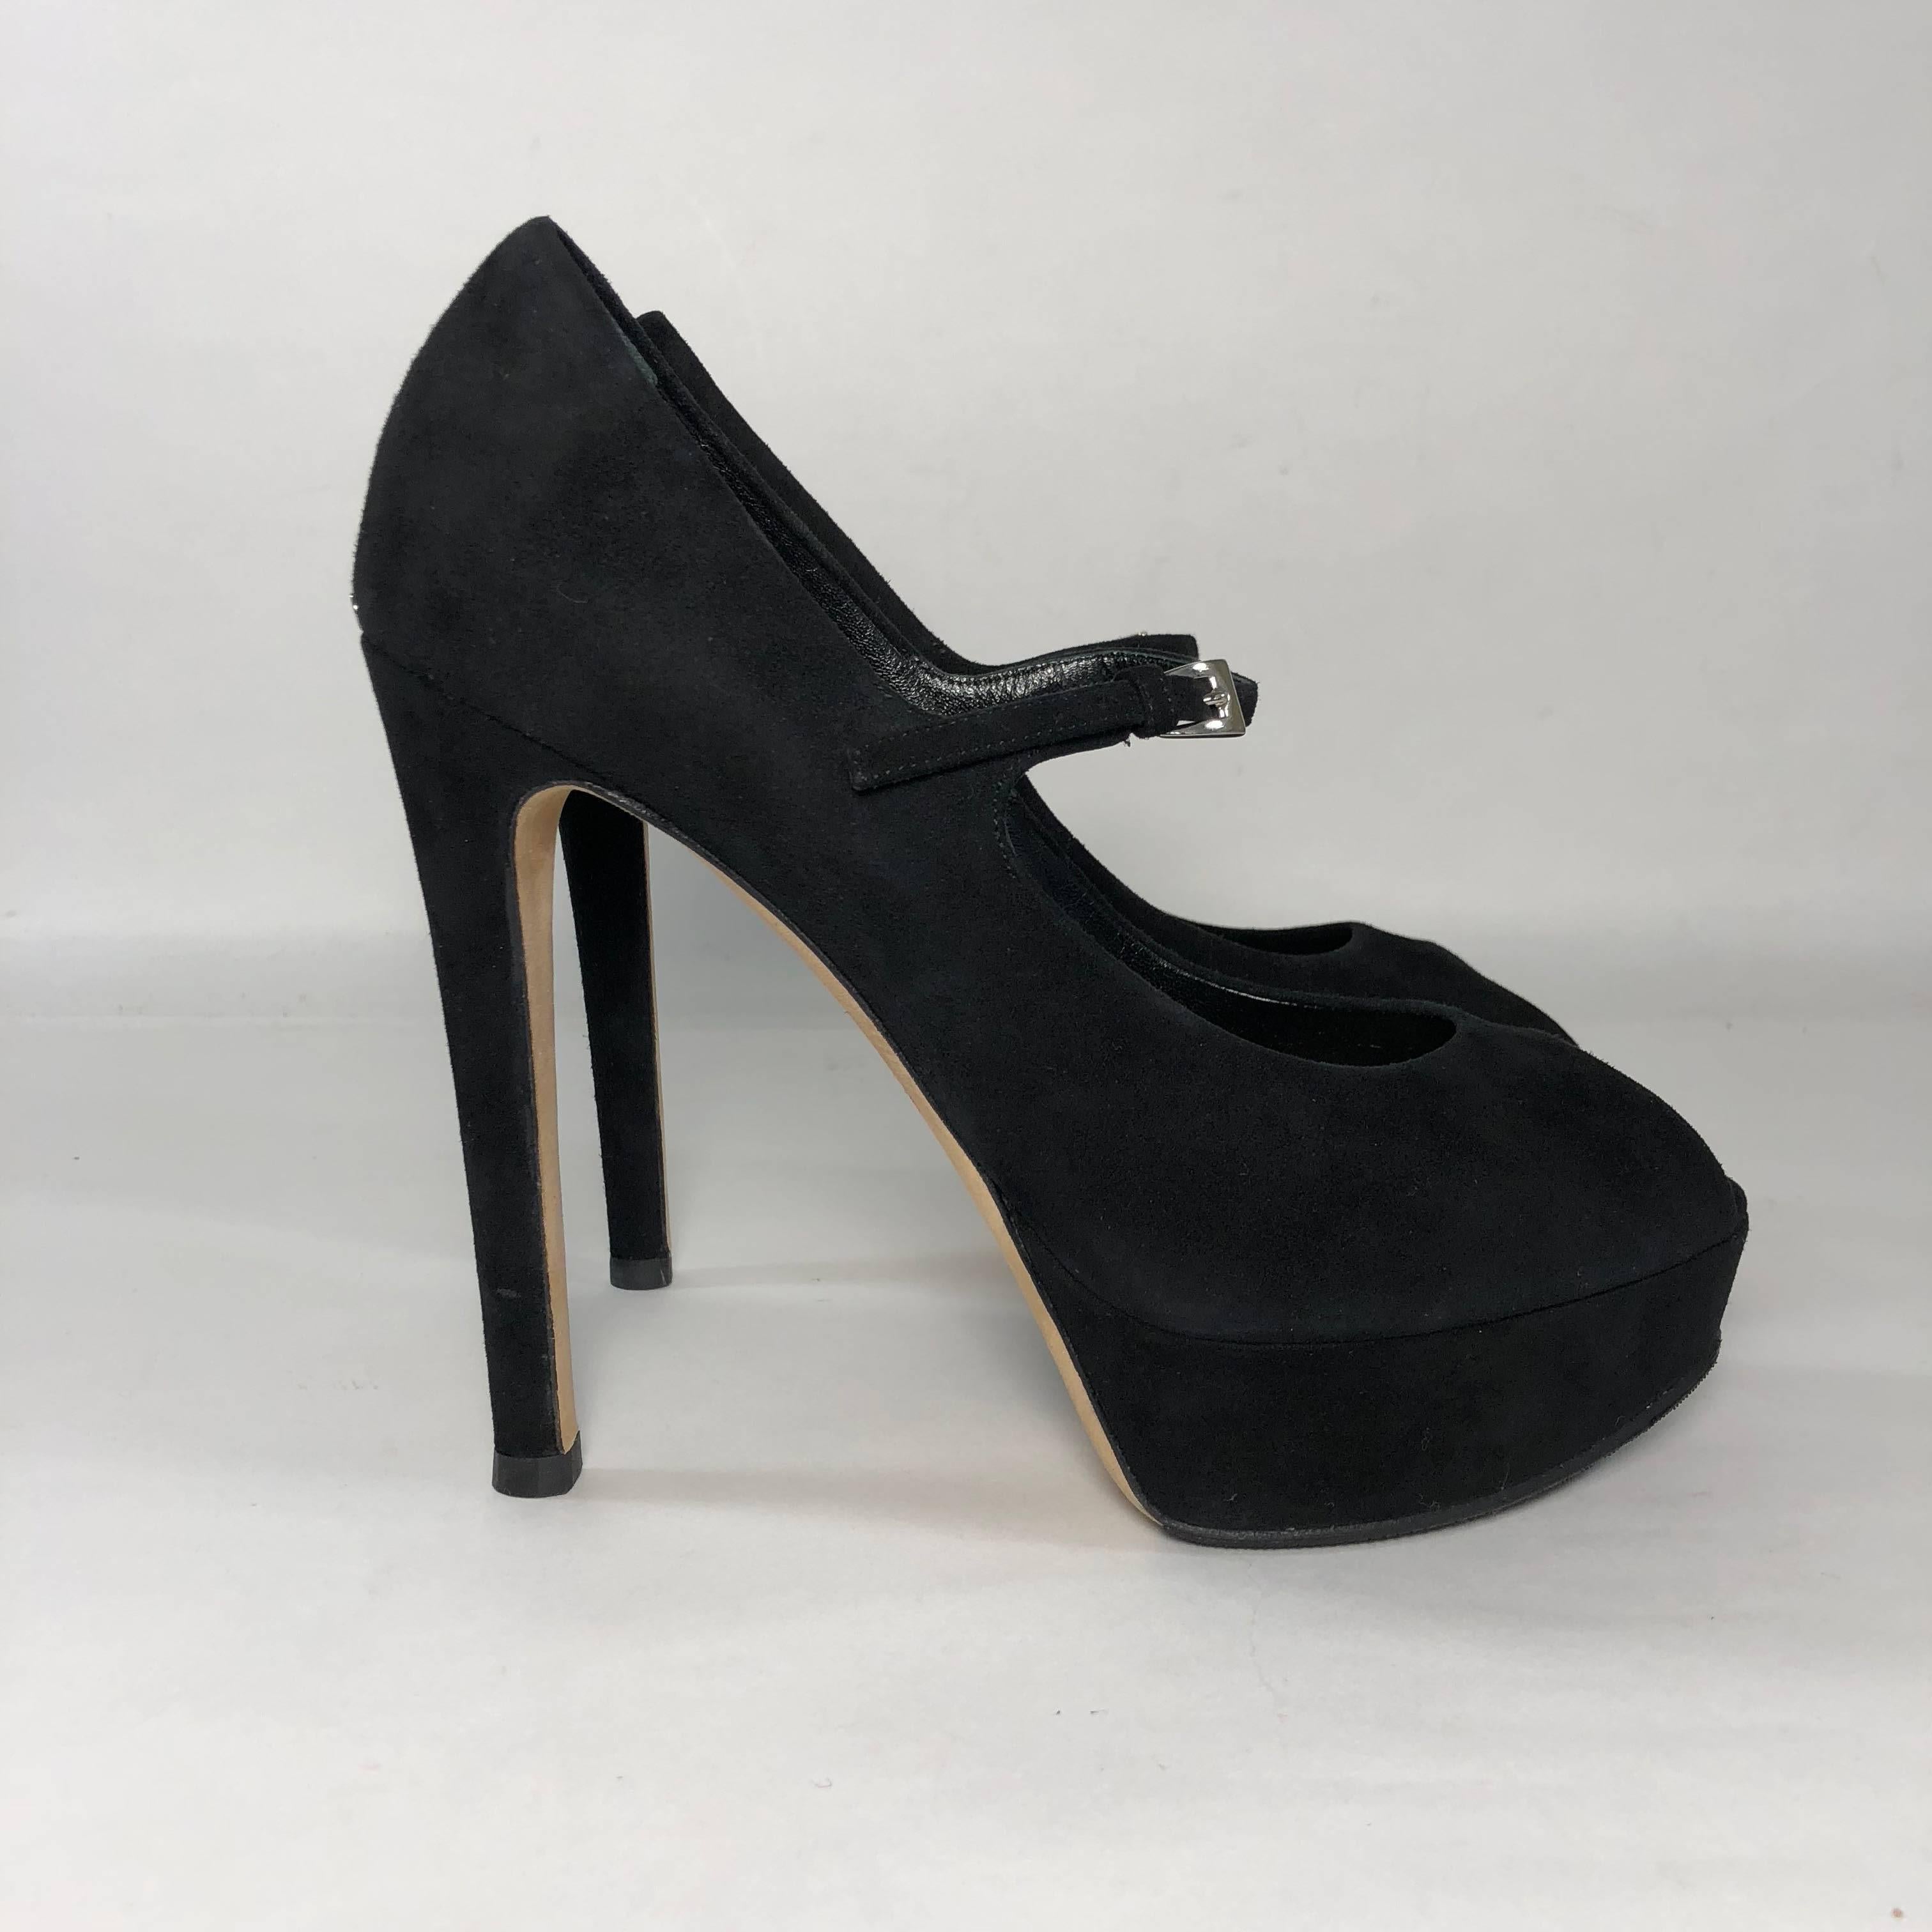 Christian Dior Stiletto Platform Peep Toe in Black Suede In New Condition For Sale In Saint Charles, IL